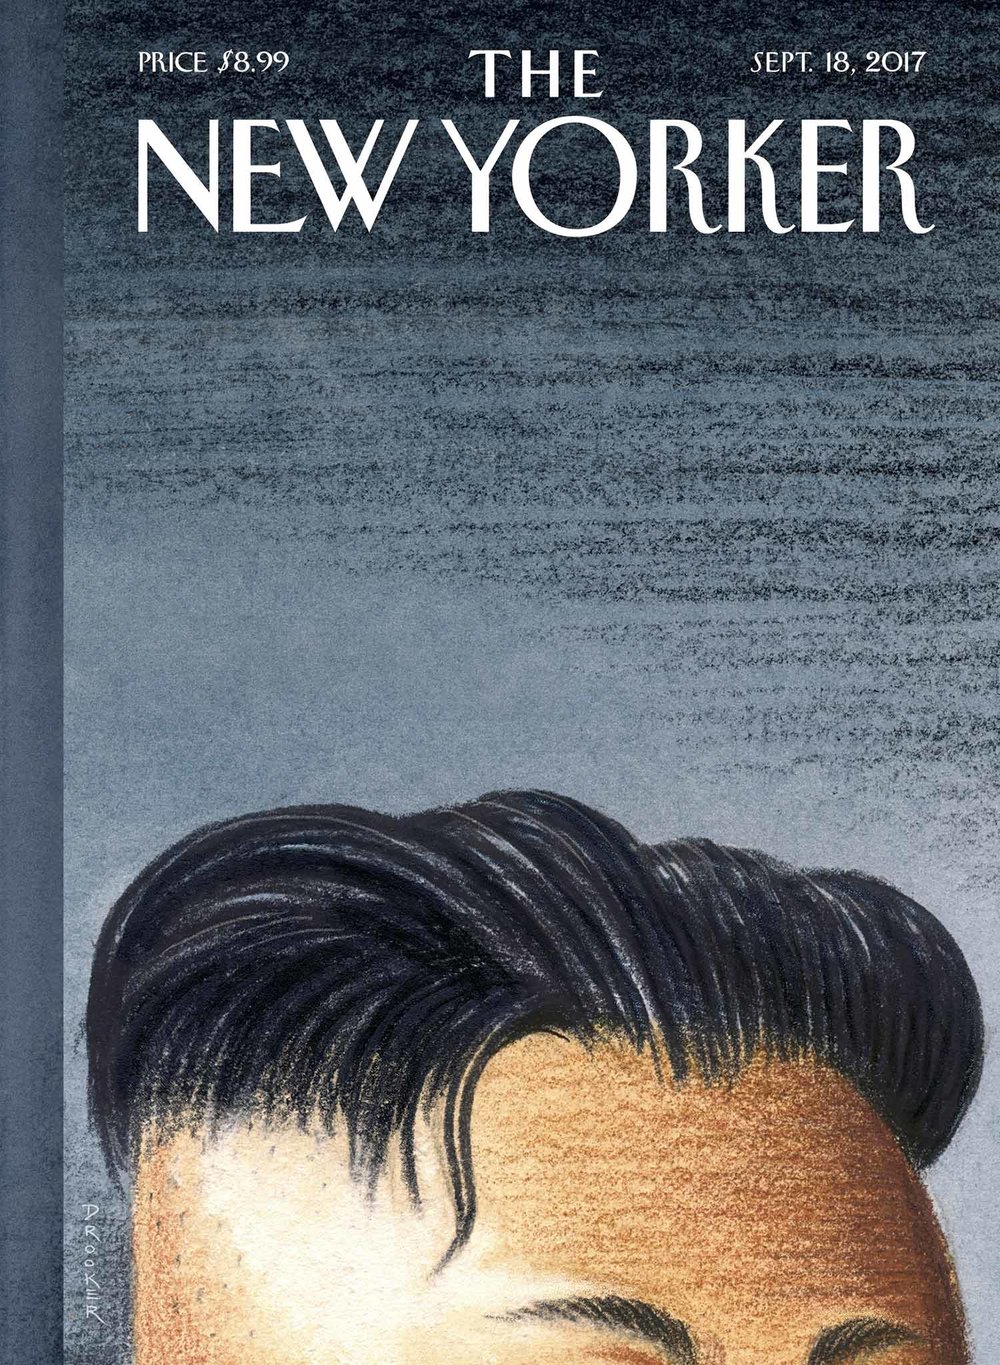 the new yorker magazine review